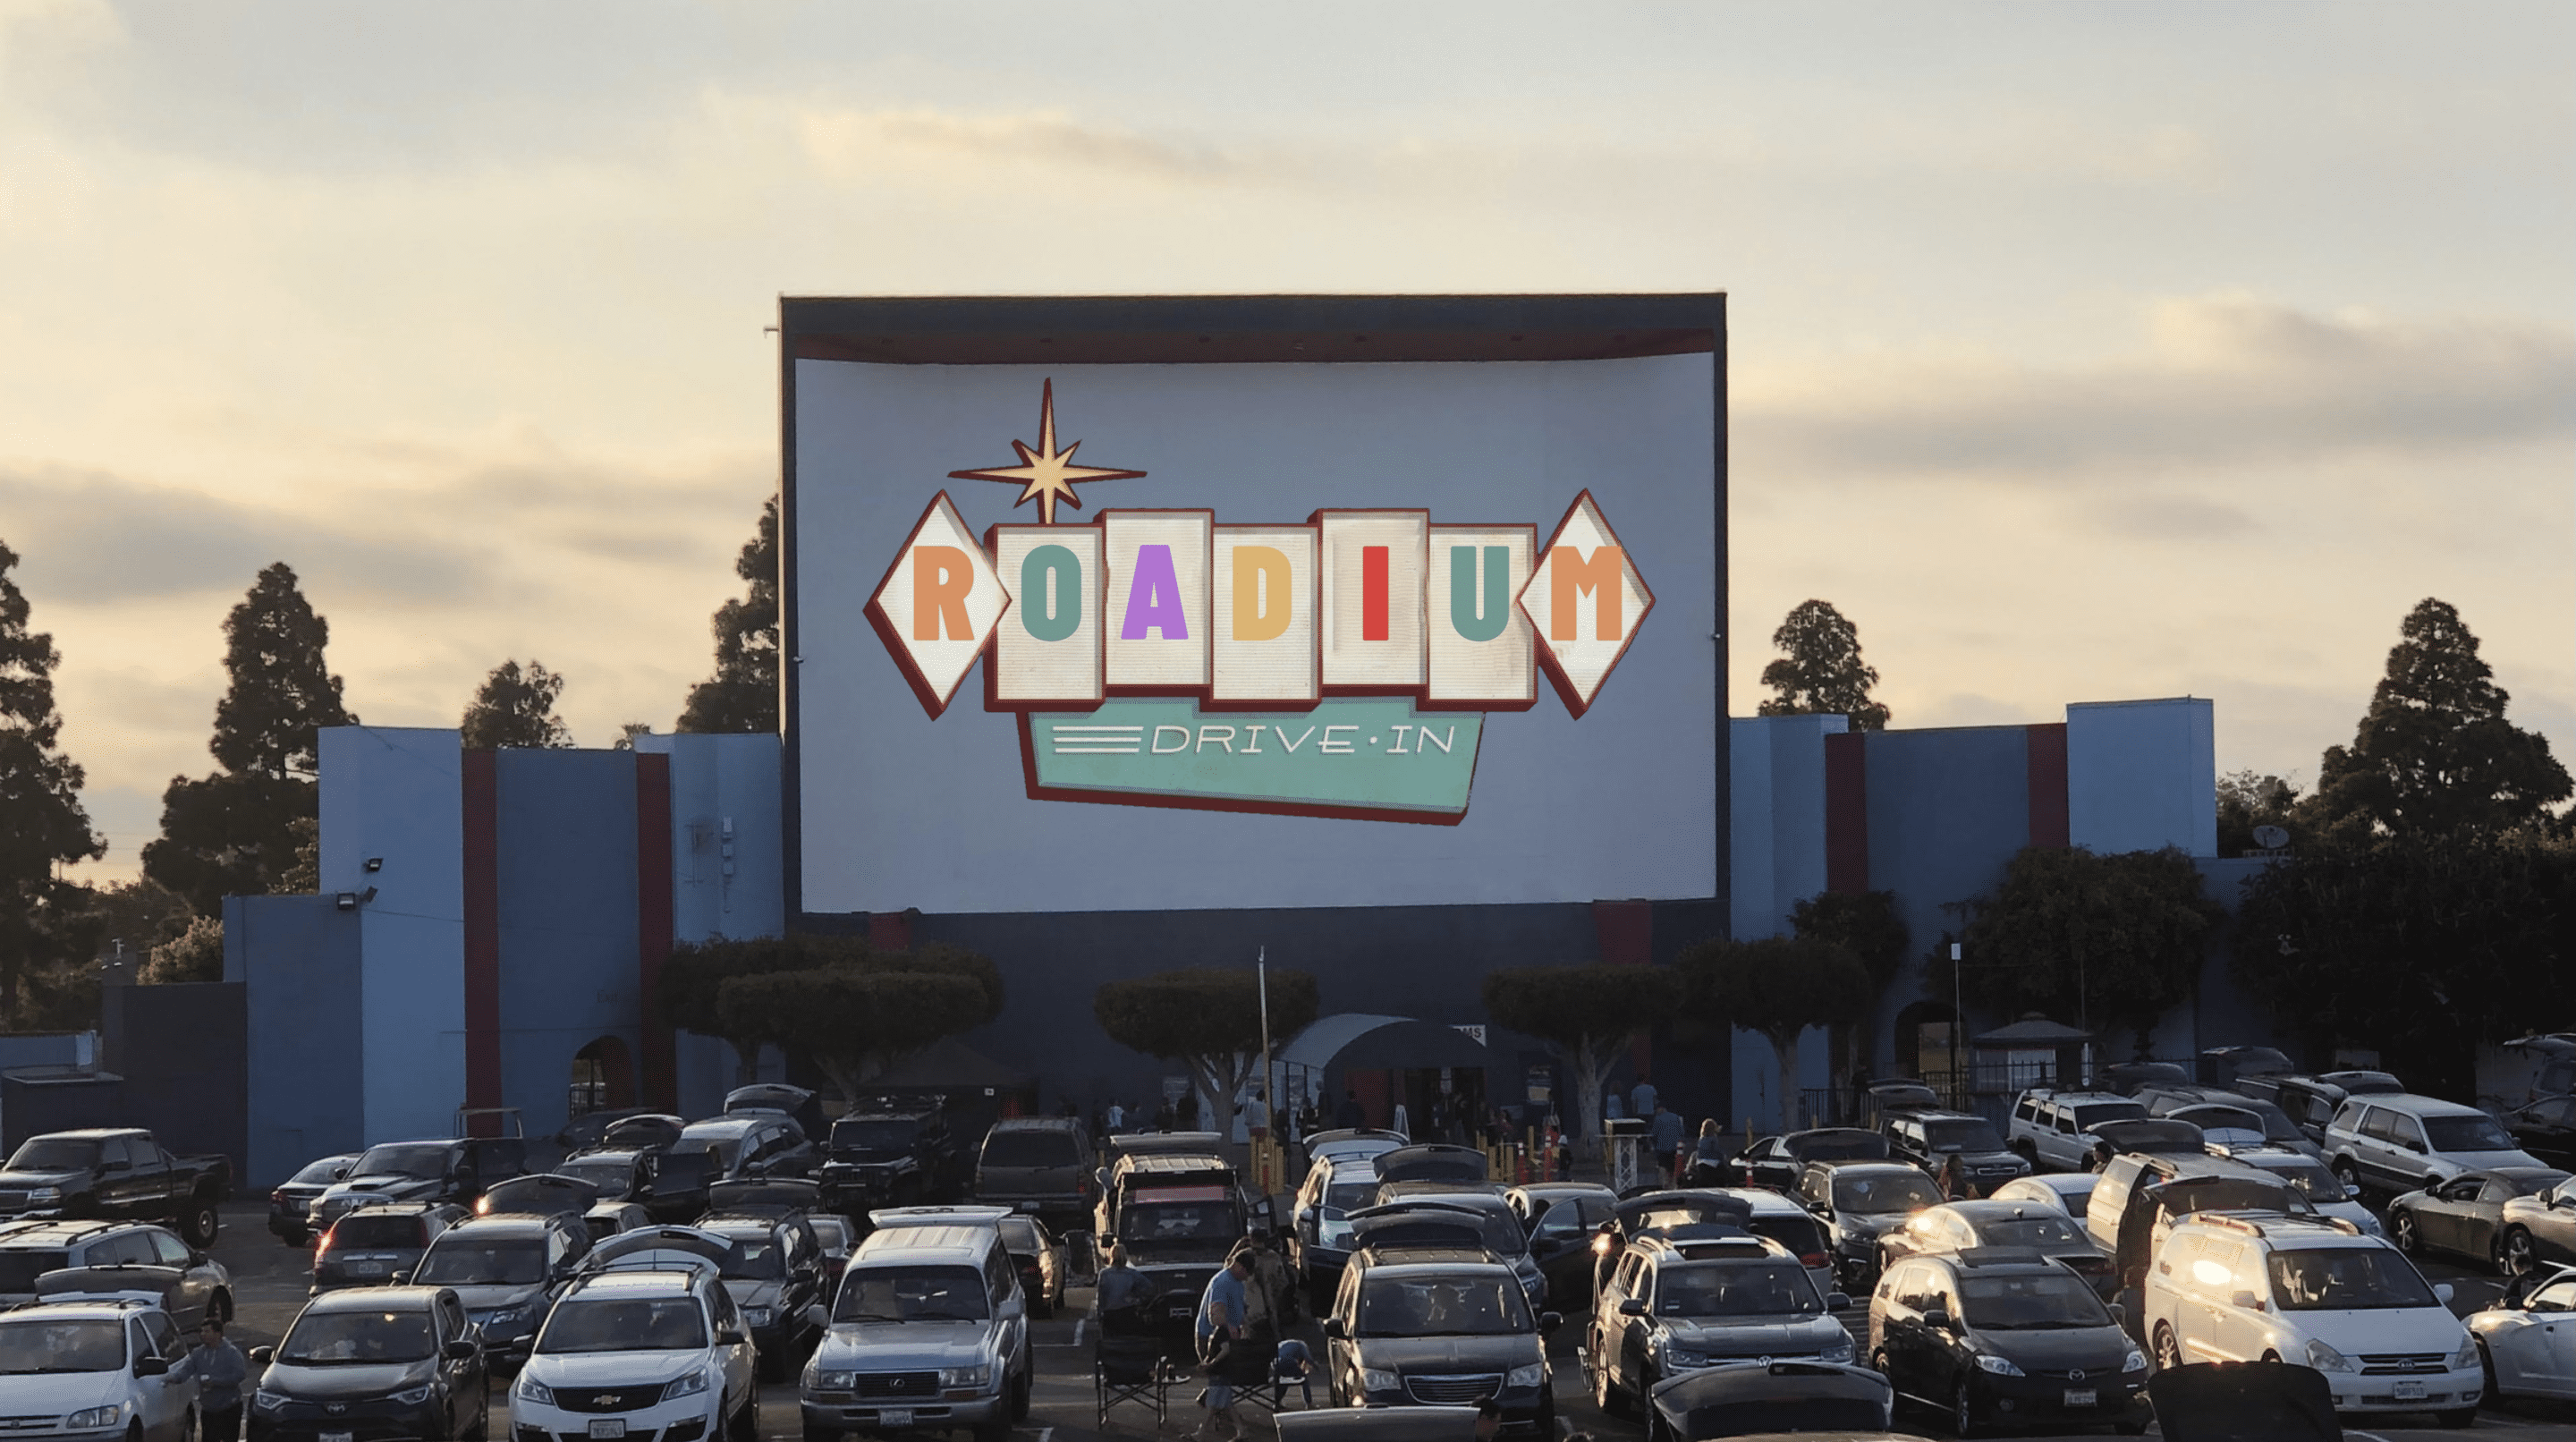 50s Hollywood Night at The Roadium: Double Feature on December 12